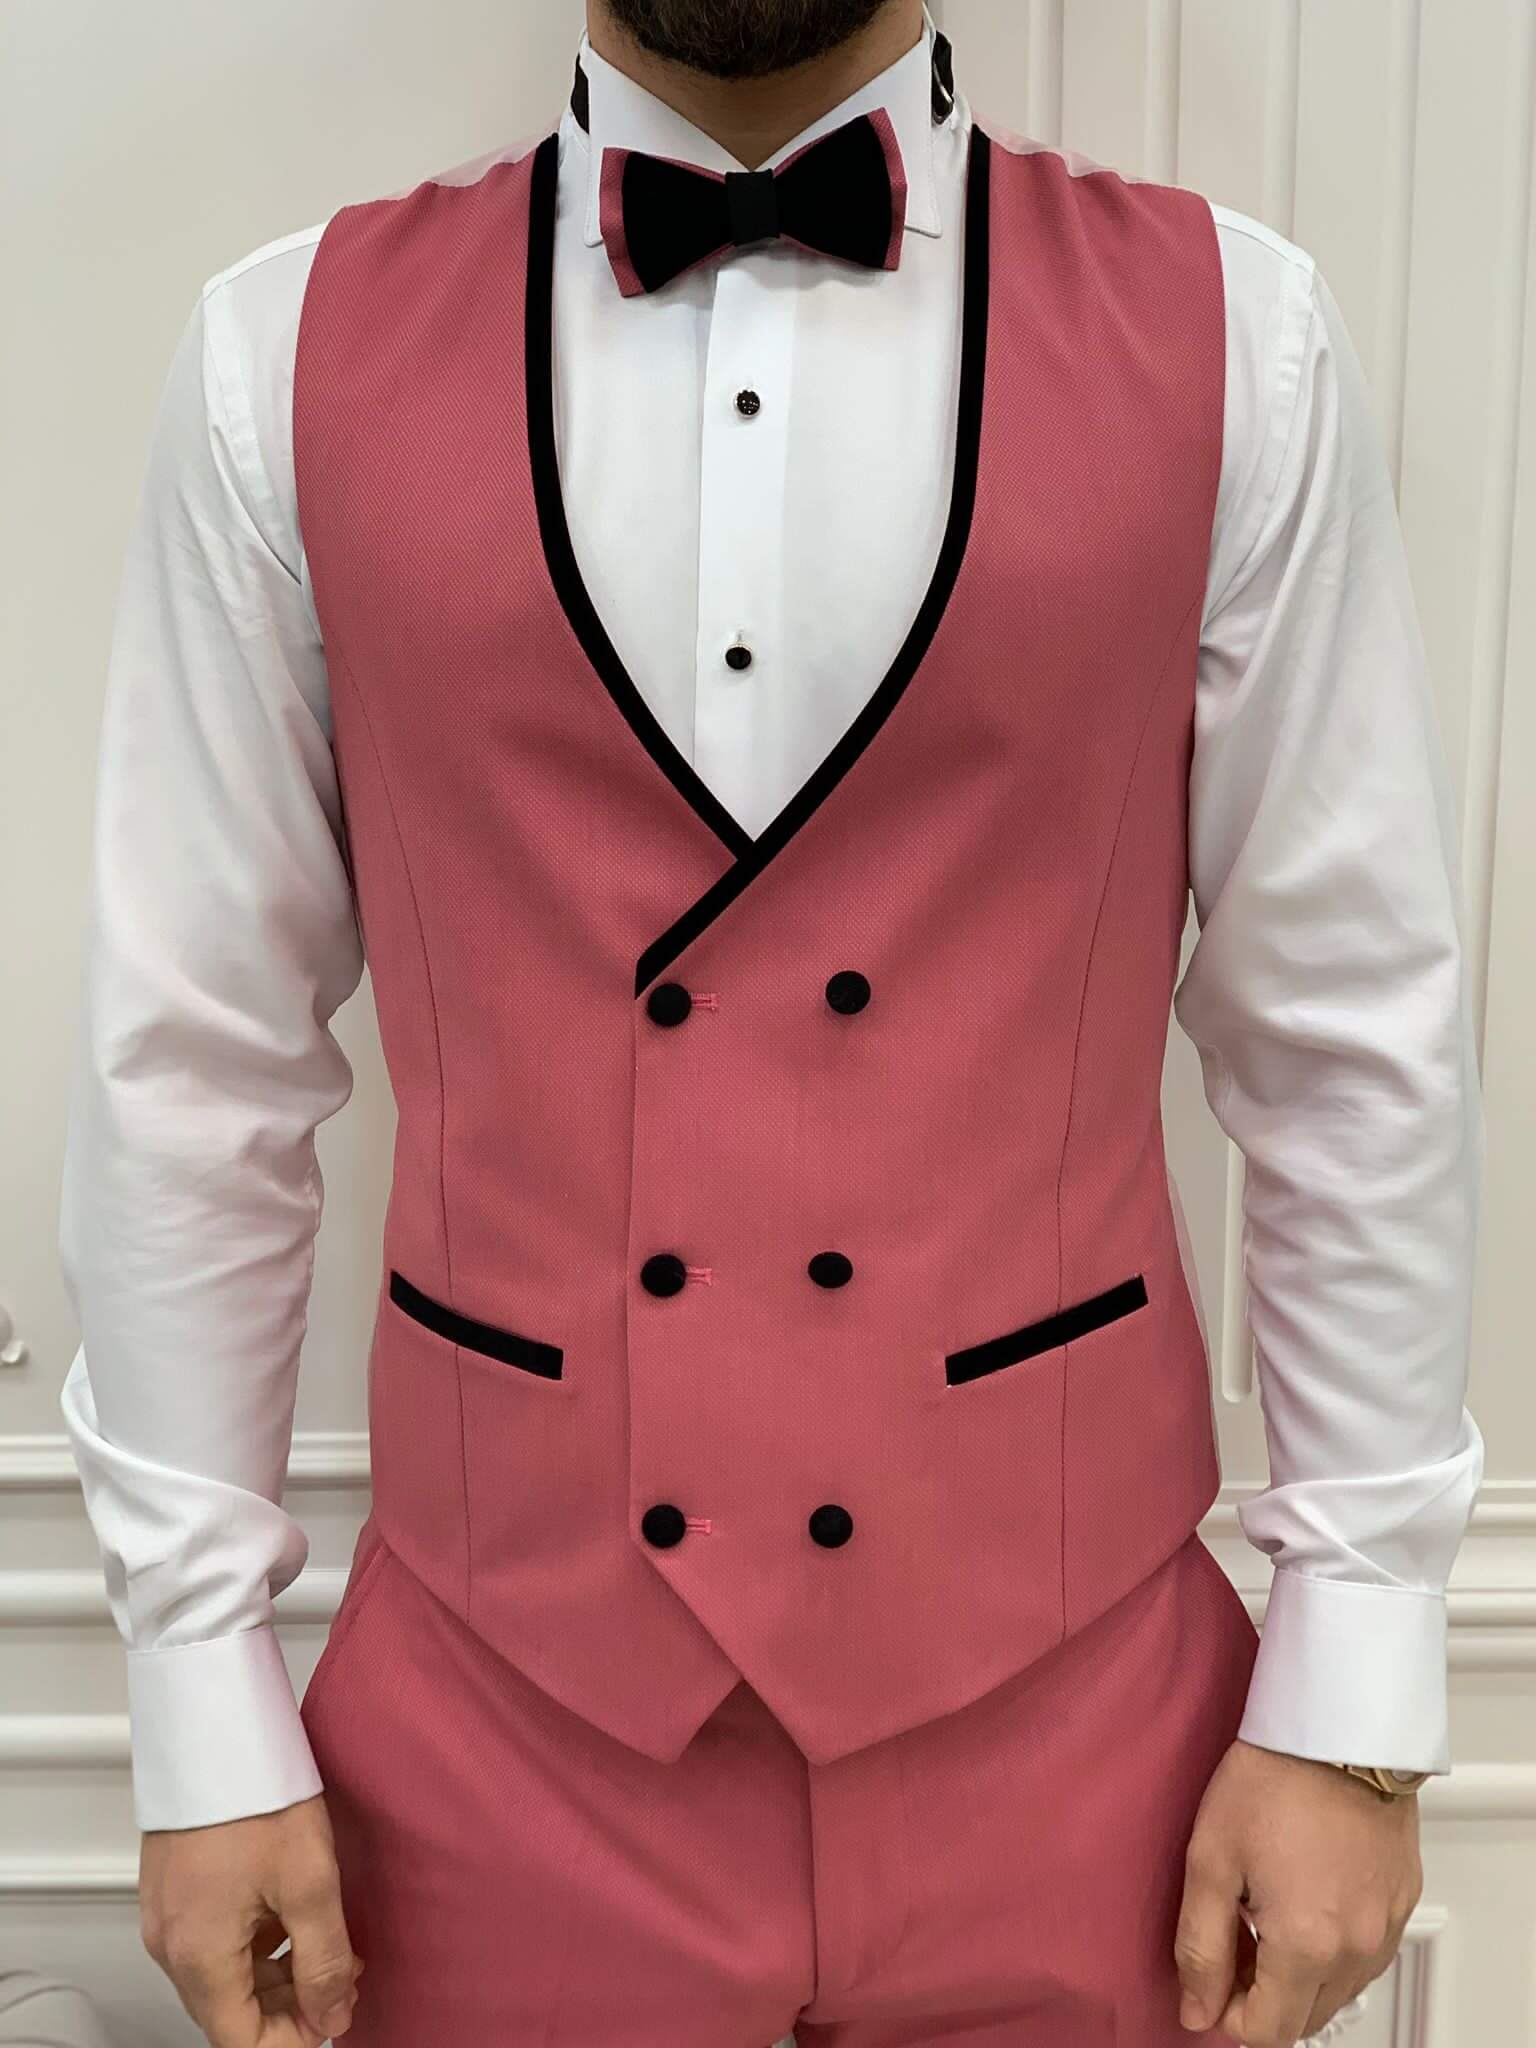 Man wearing Pink Tuxedo with Peak Lapel, Single Button, Slim-Fit Italian Cut ready for a  Formal Event